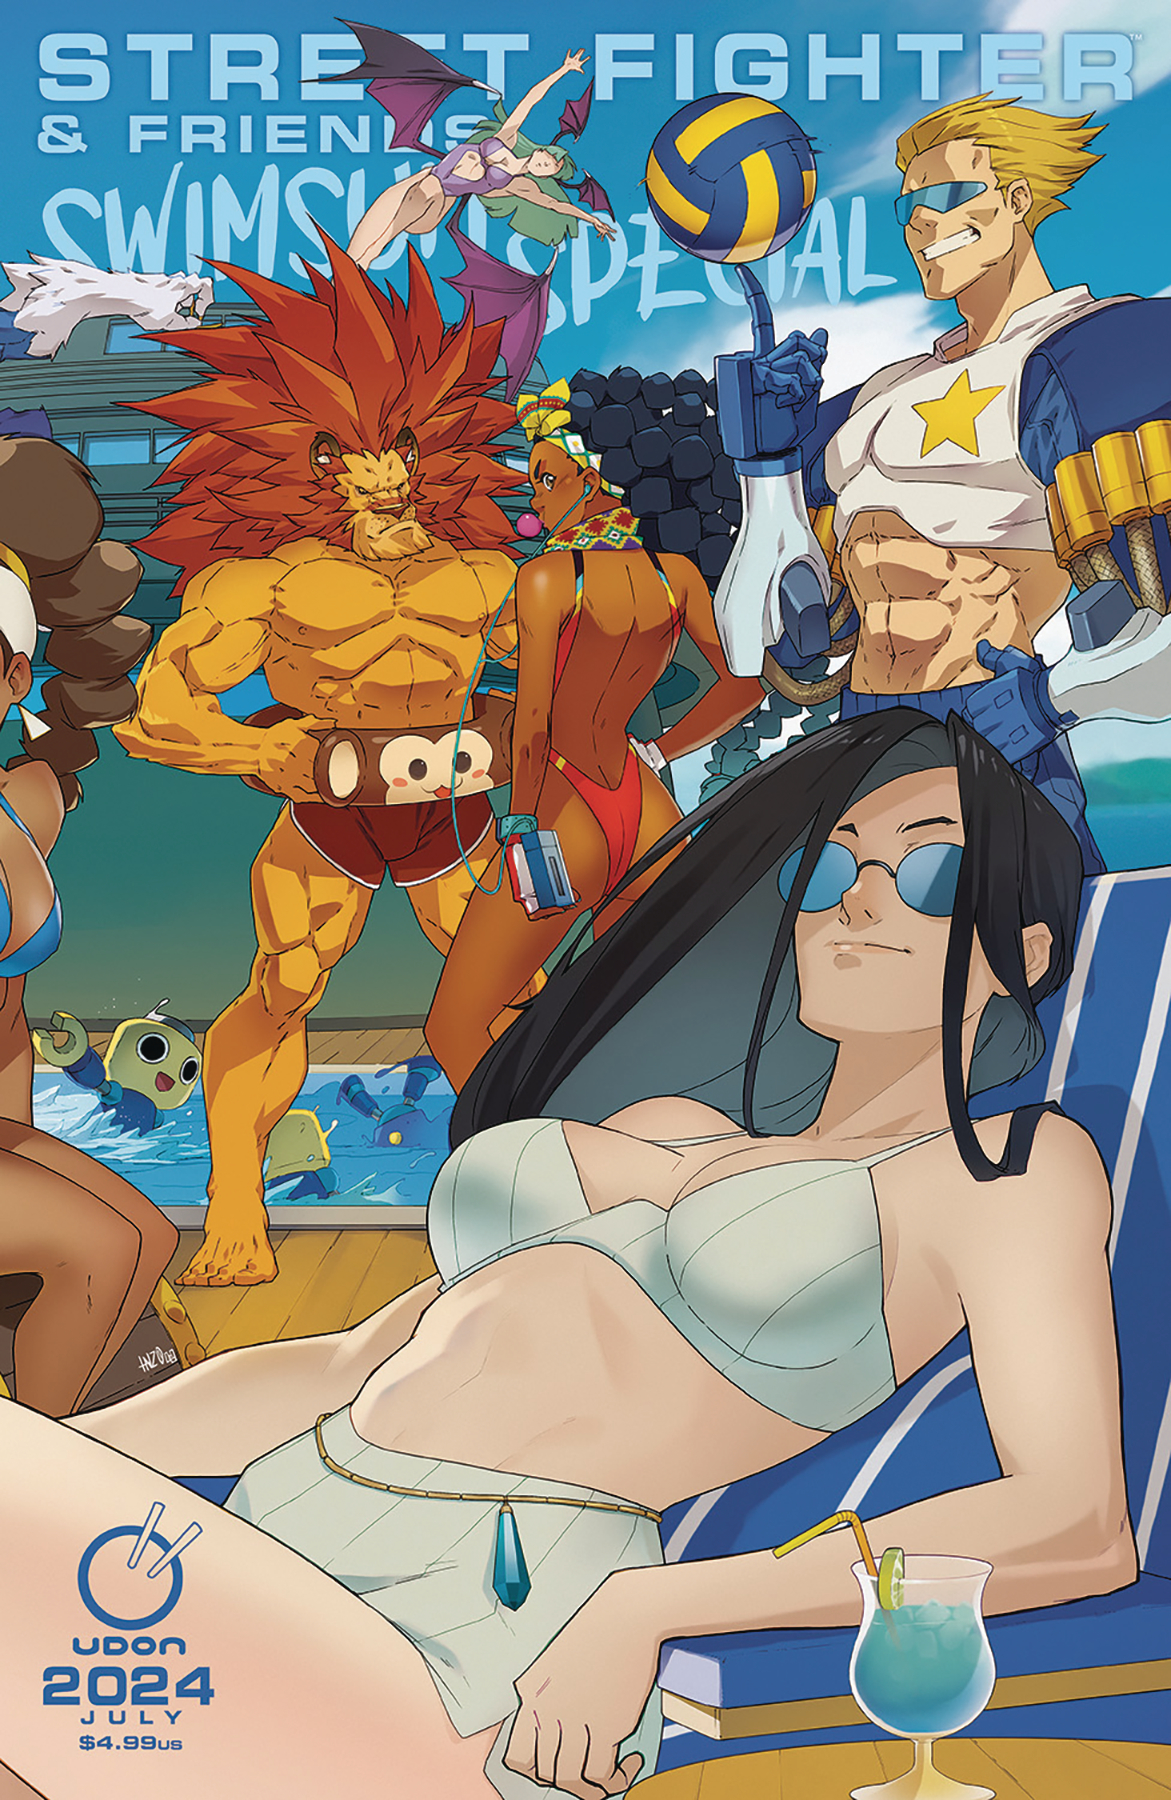 Street Fighter & Friends Swimsuit Special (2024) #1 1 for 5 Incentive Cover